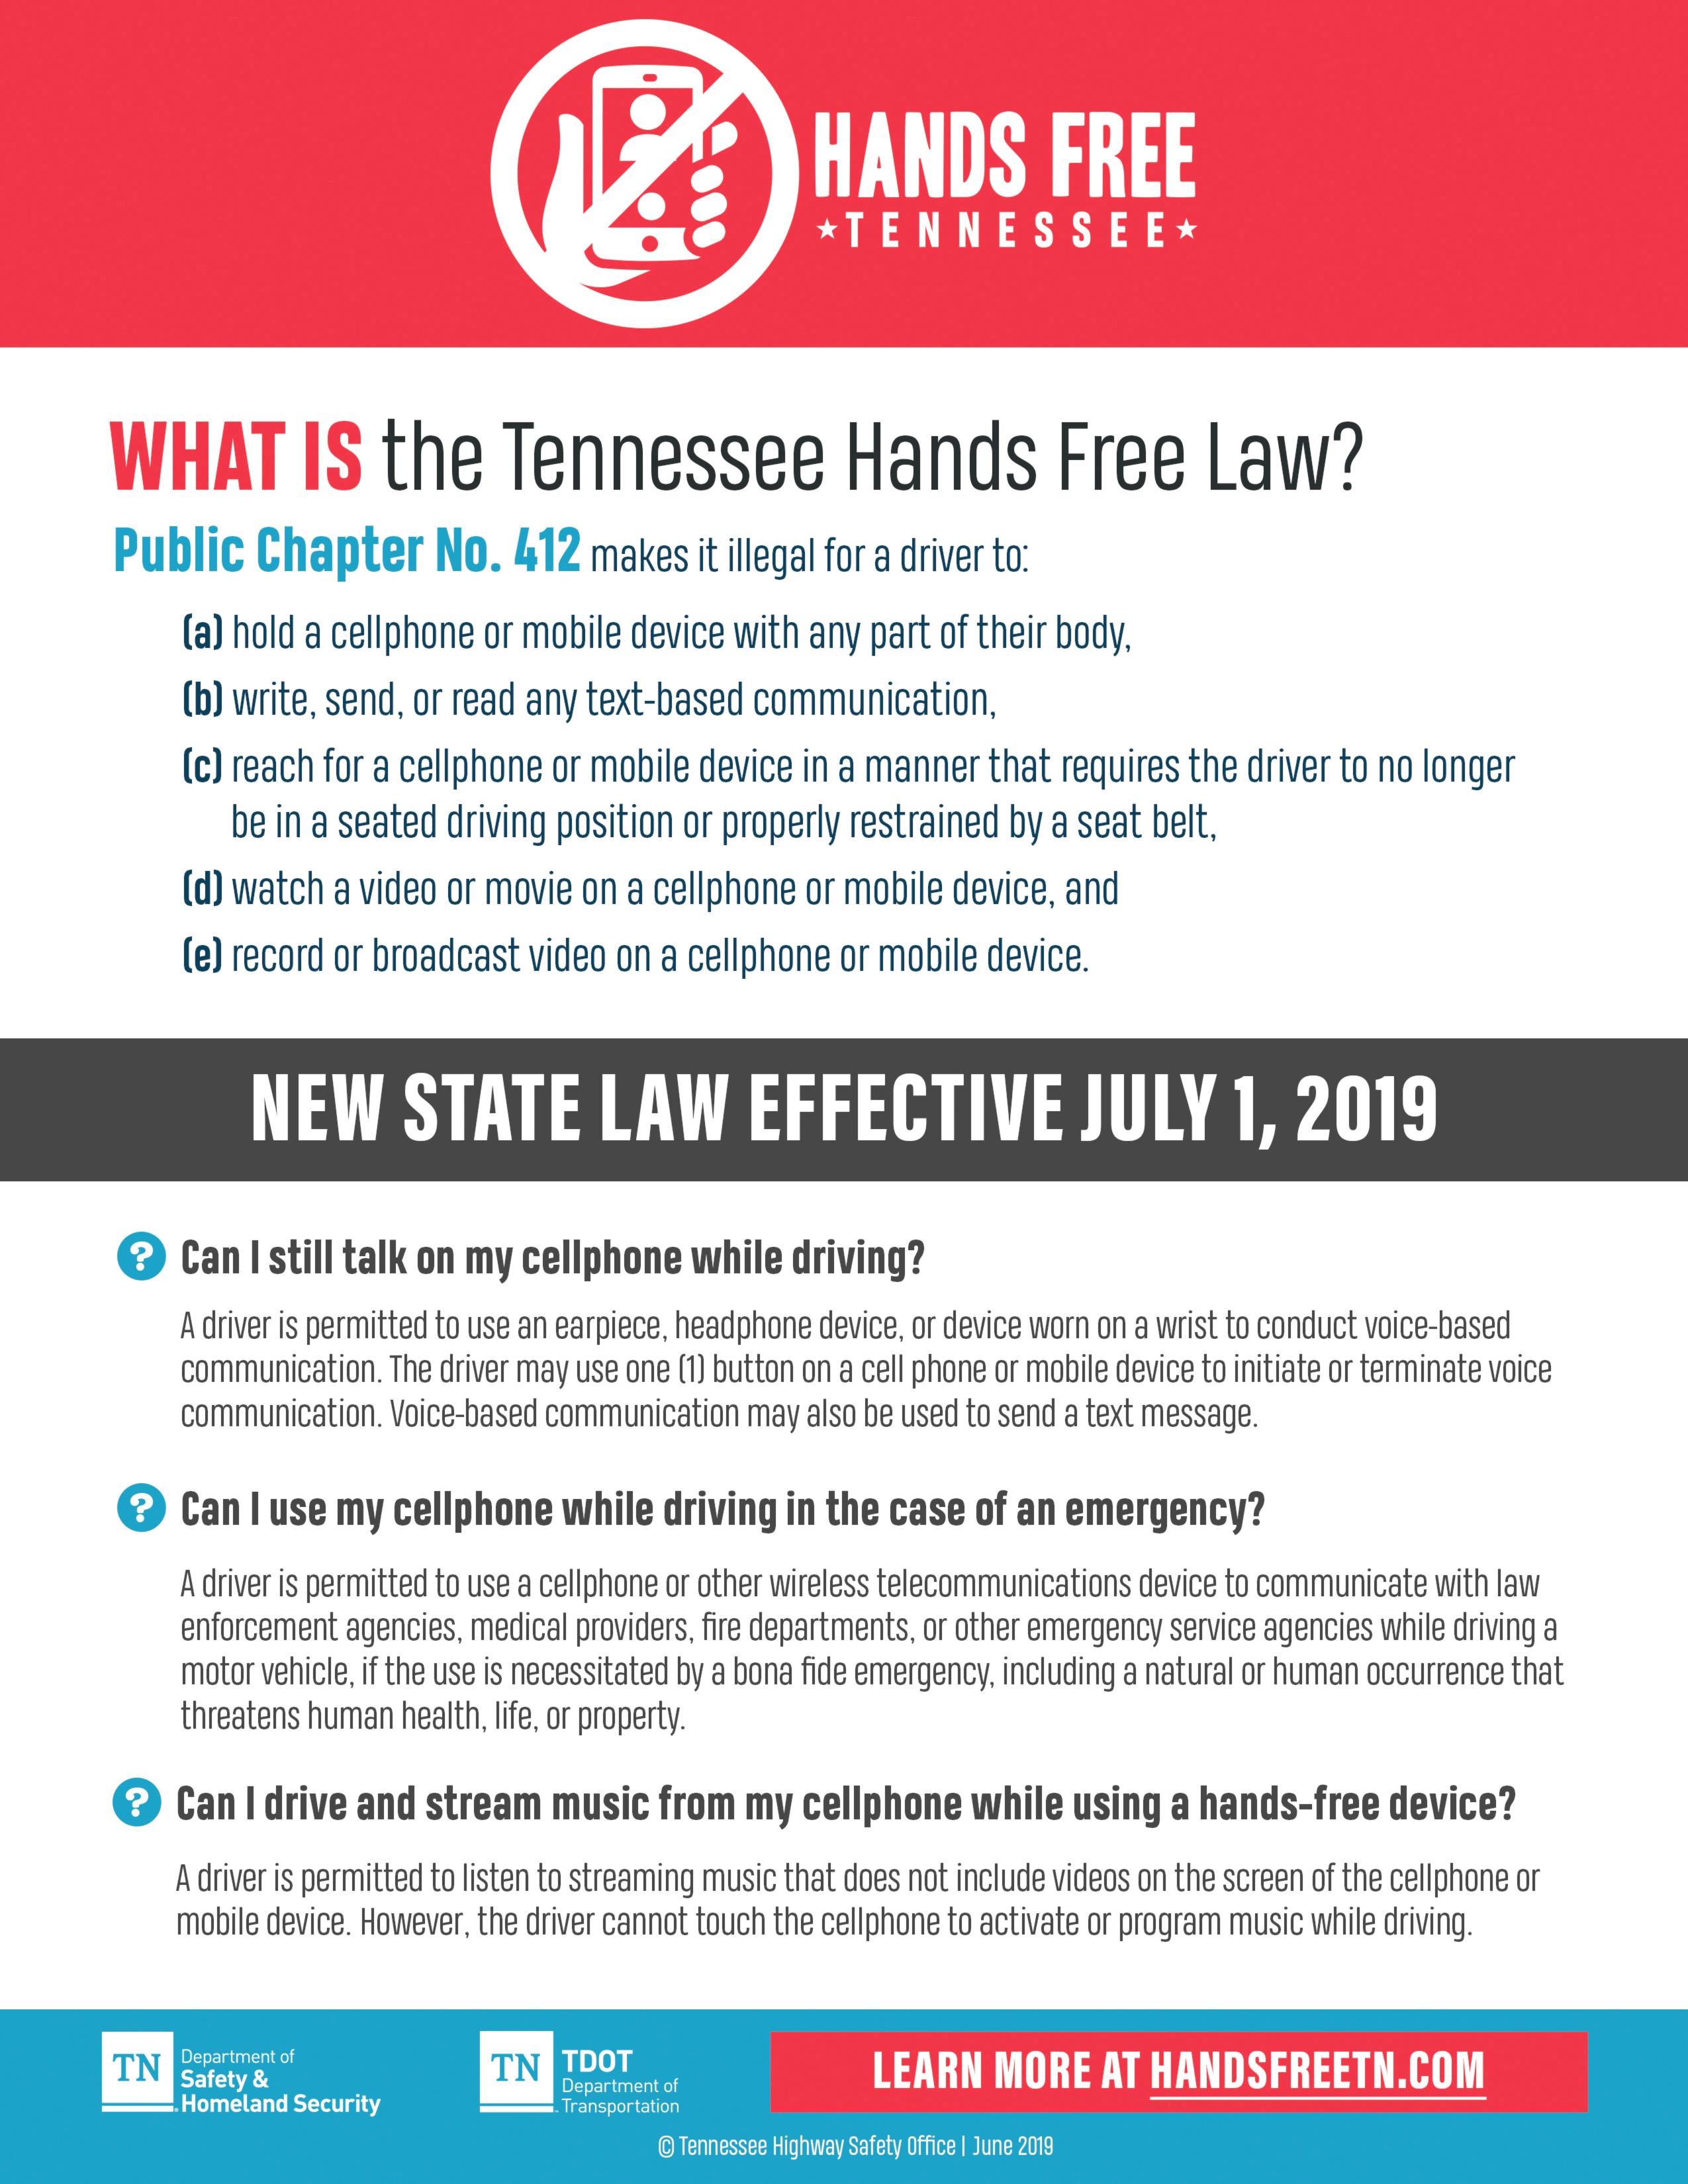 Flyer on TN's new law against cell phone use while driving